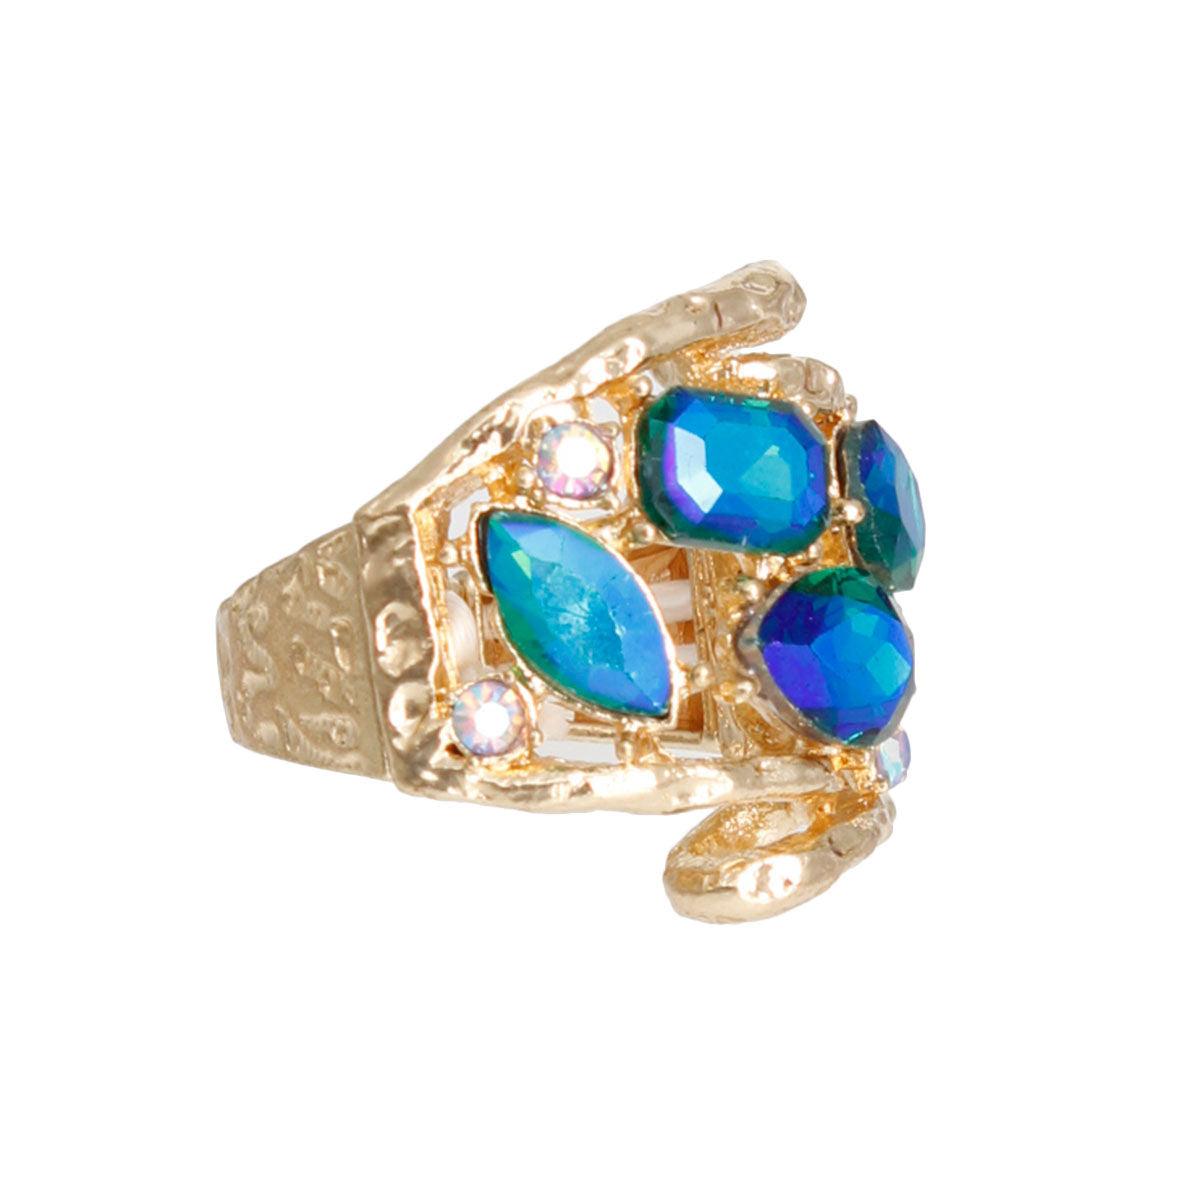 Stunning Blue Crystal Curved Cocktail Ring - Must-Have Accessory